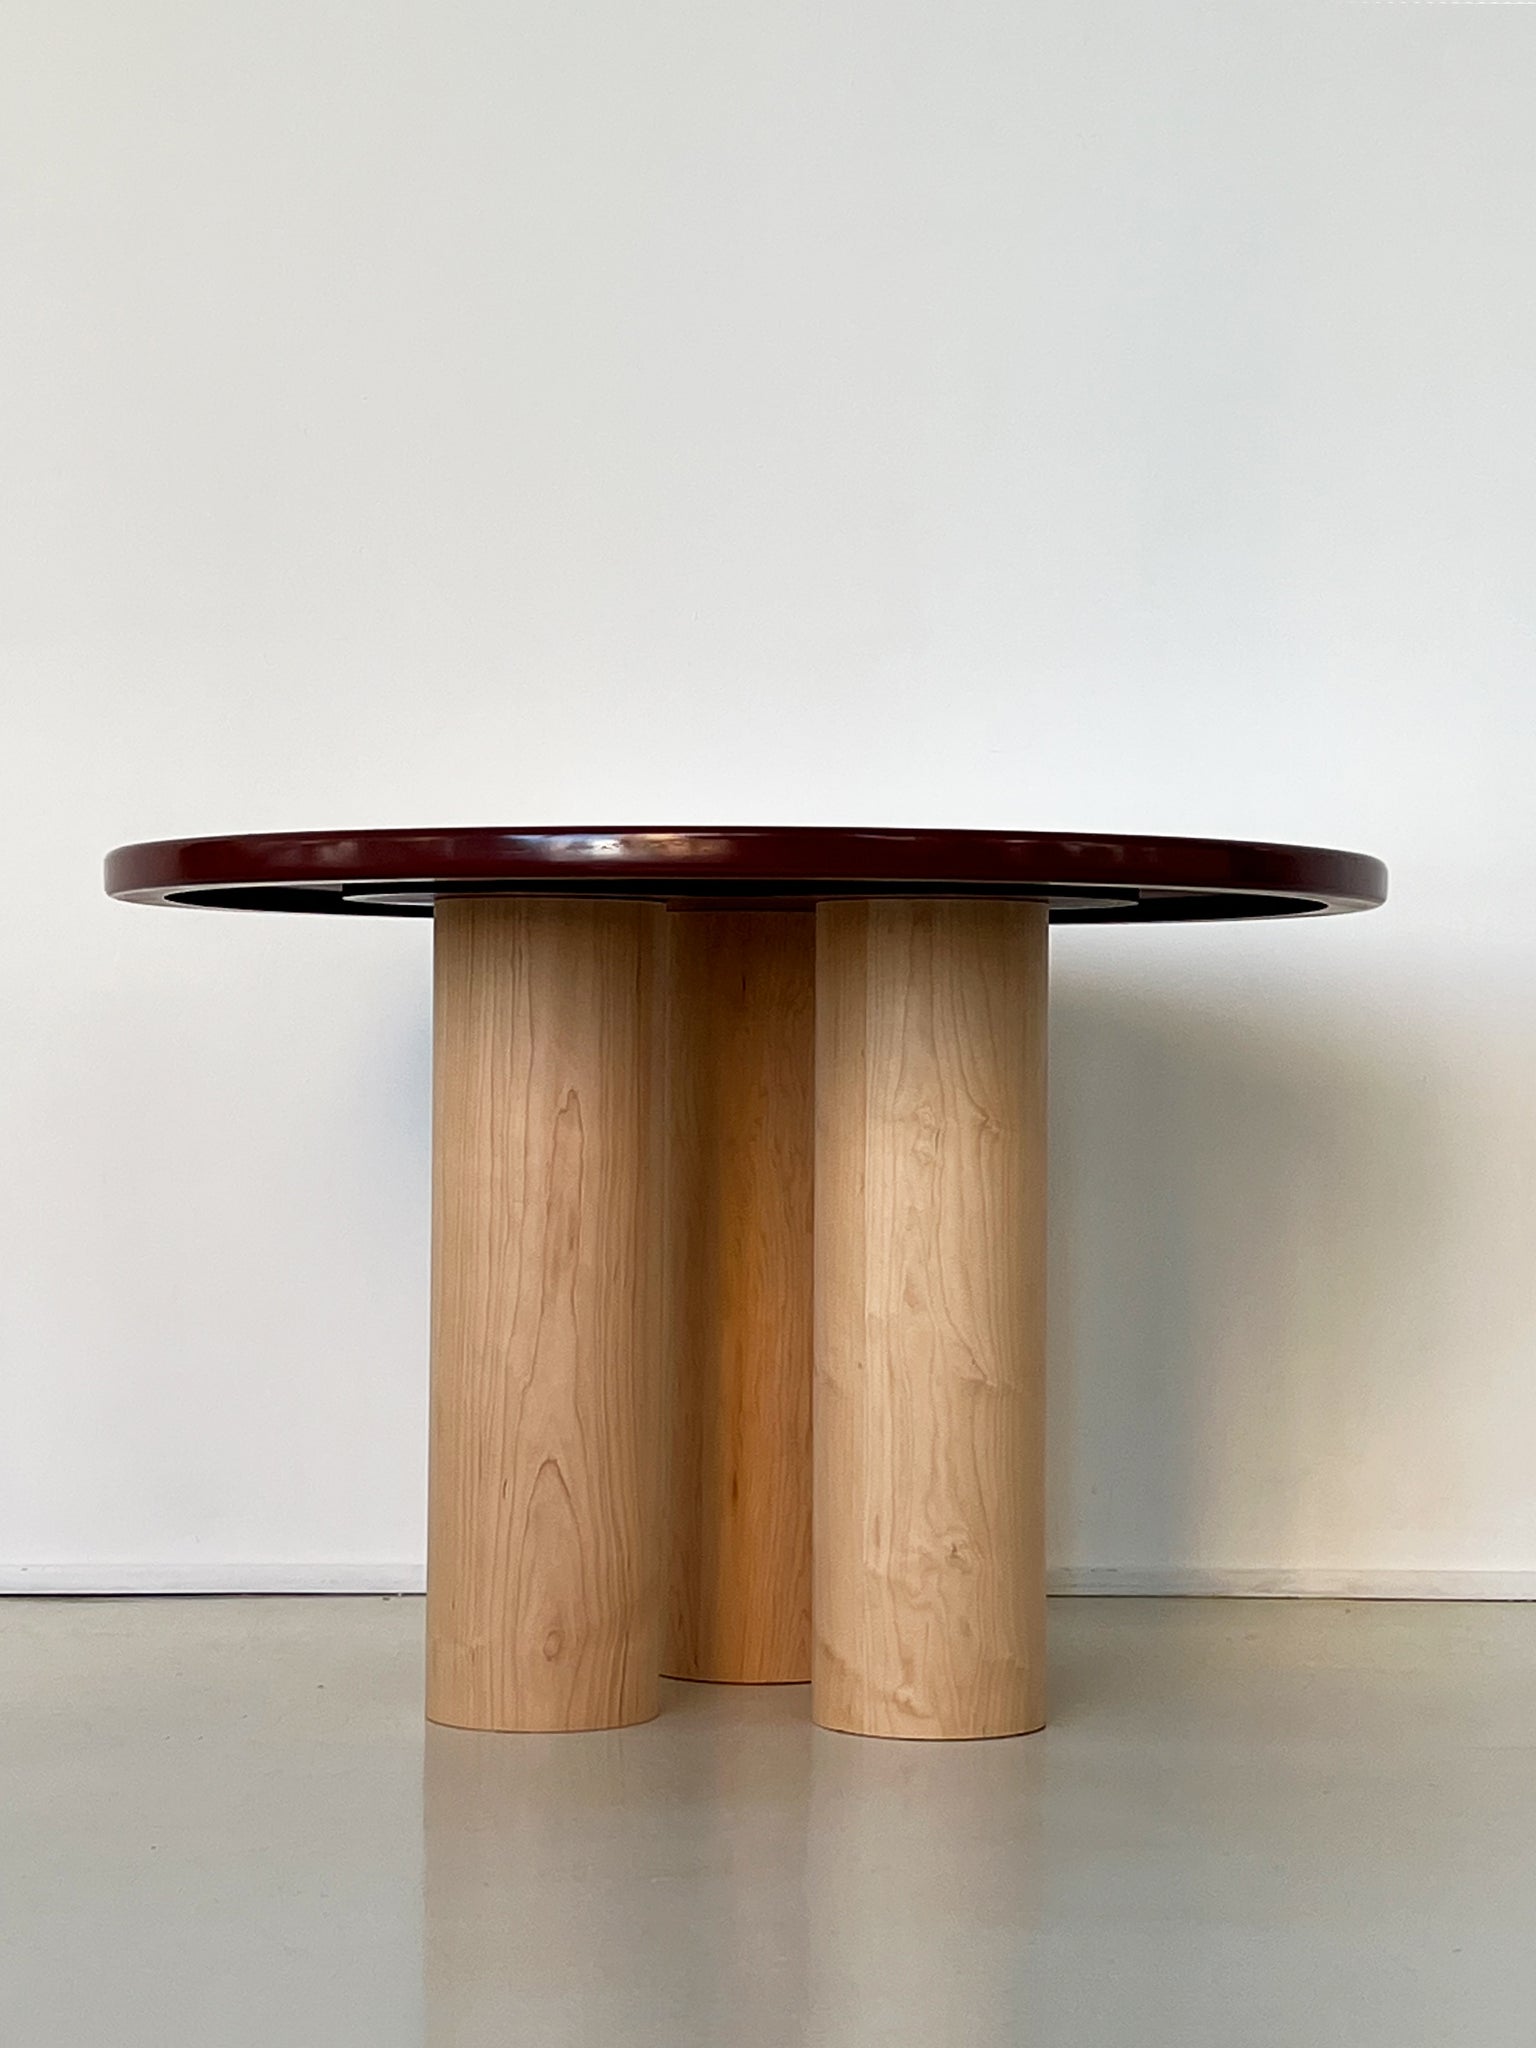 The Pier Table in Wine Red and Maple